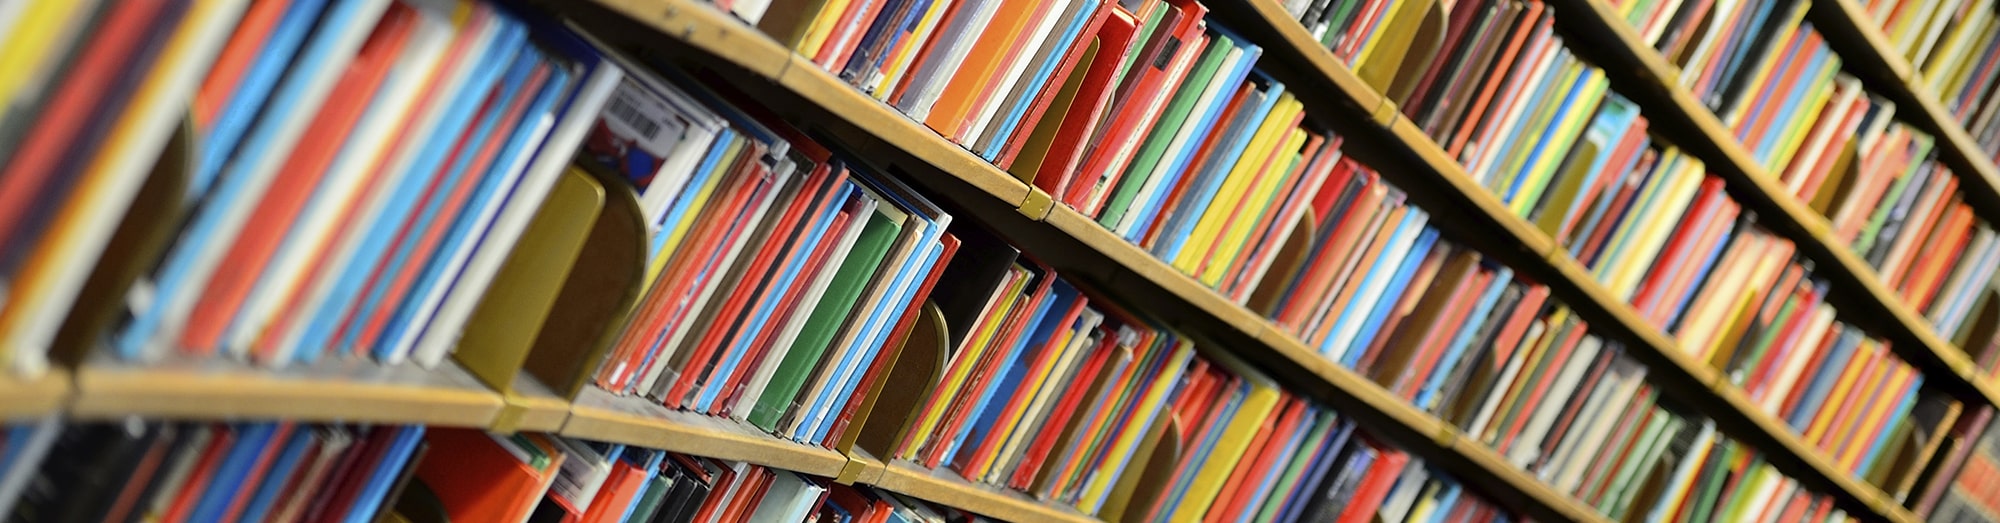 Colorful books lined up on a bookshelf